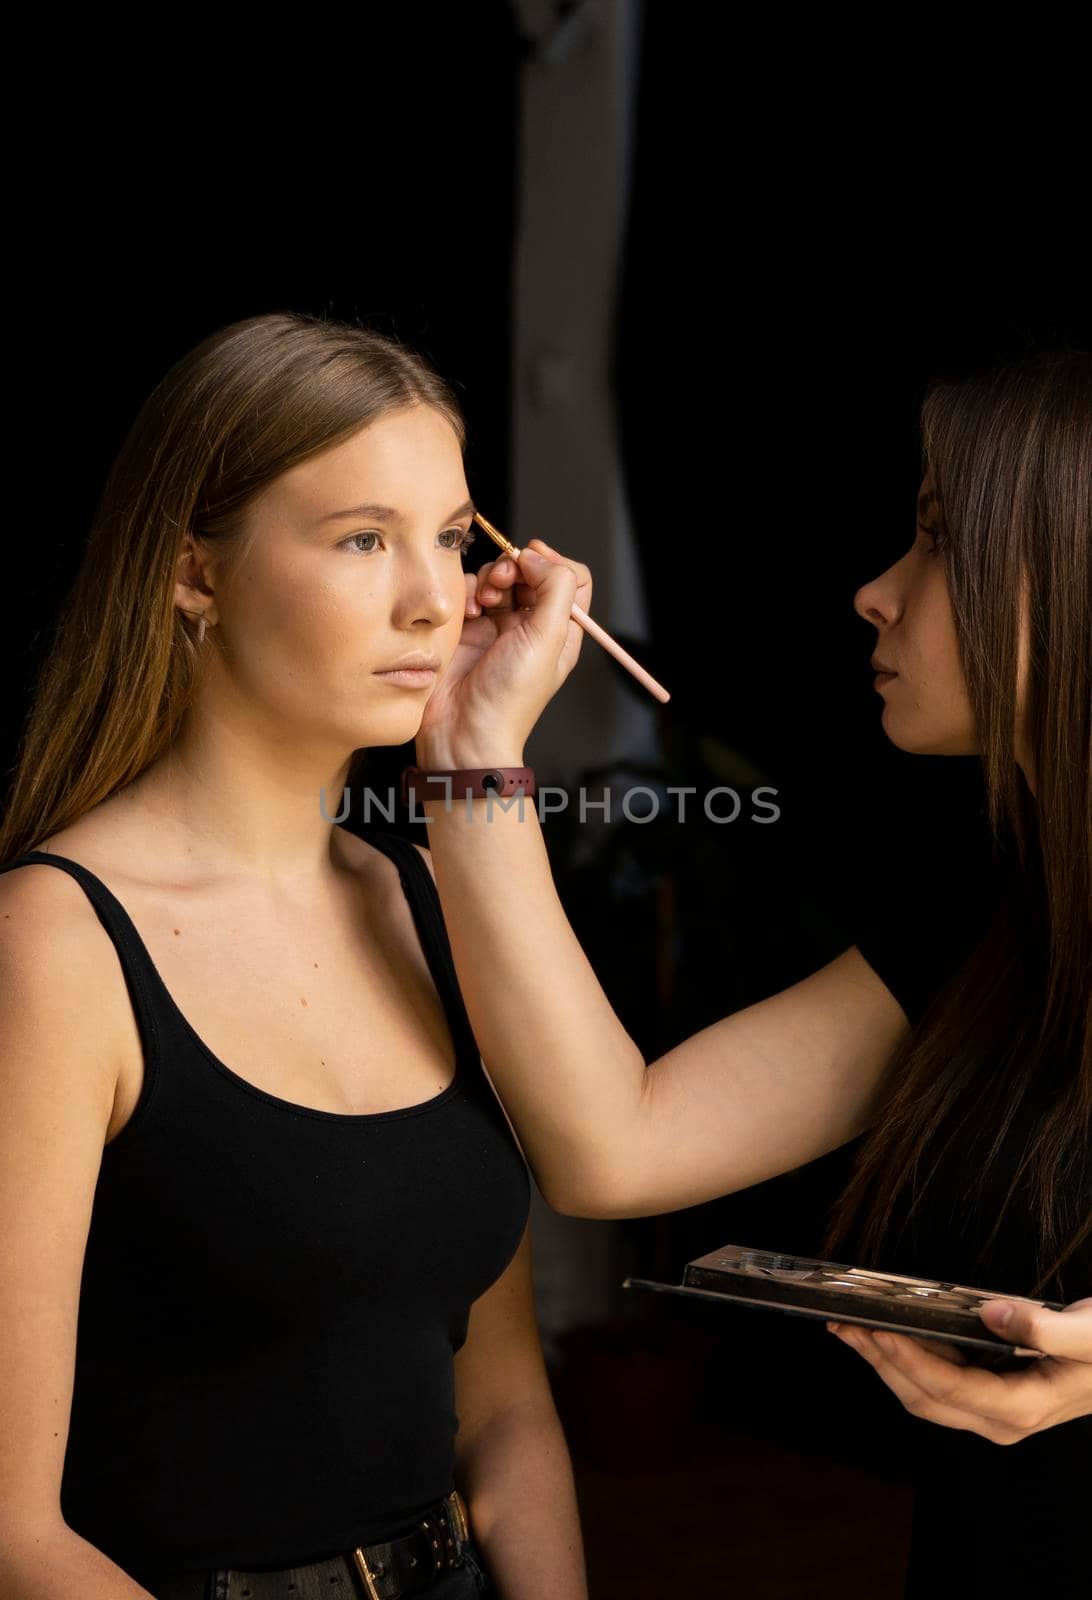 Makeup artist doing a eyebrows makeup on a beautiful woman face. Hand of make-up master is painting eyebrow of young beauty model girl. Make up in process